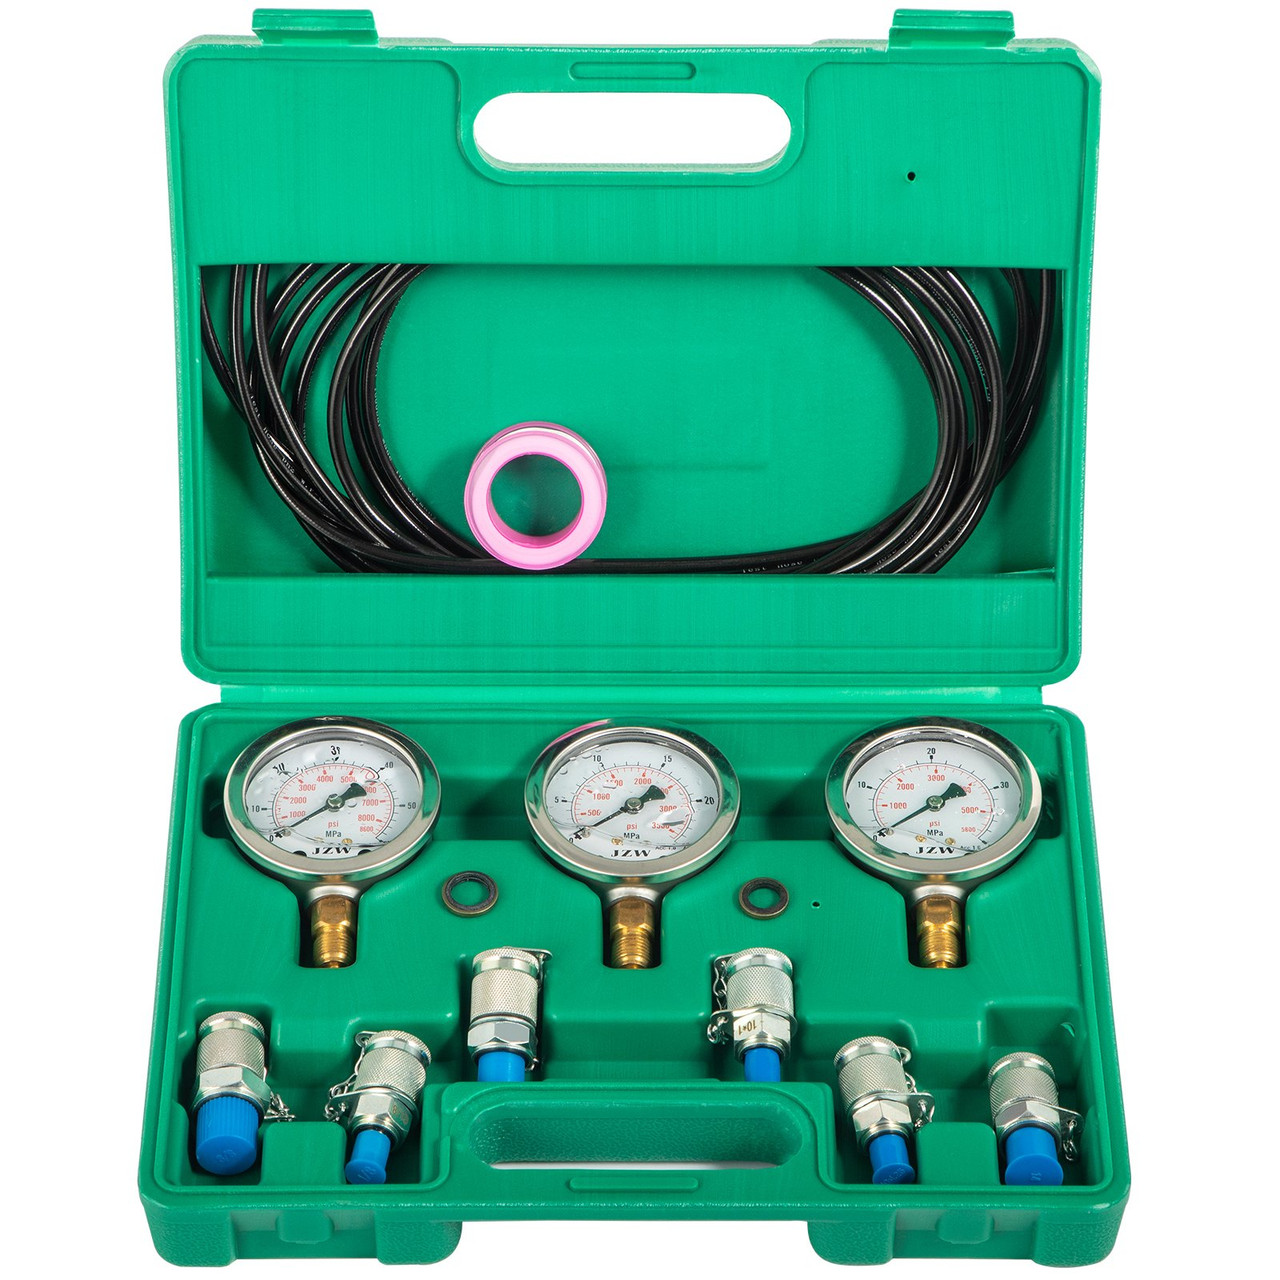 VEVOR Hydraulic Pressure Test Kit 25/40/60MPa, Hydraulic Test Gauge Kit with 6 Couplings, Hydraulic Gauge Kit Made of 304 Stainless Steel, for Excavator Construction Machinery